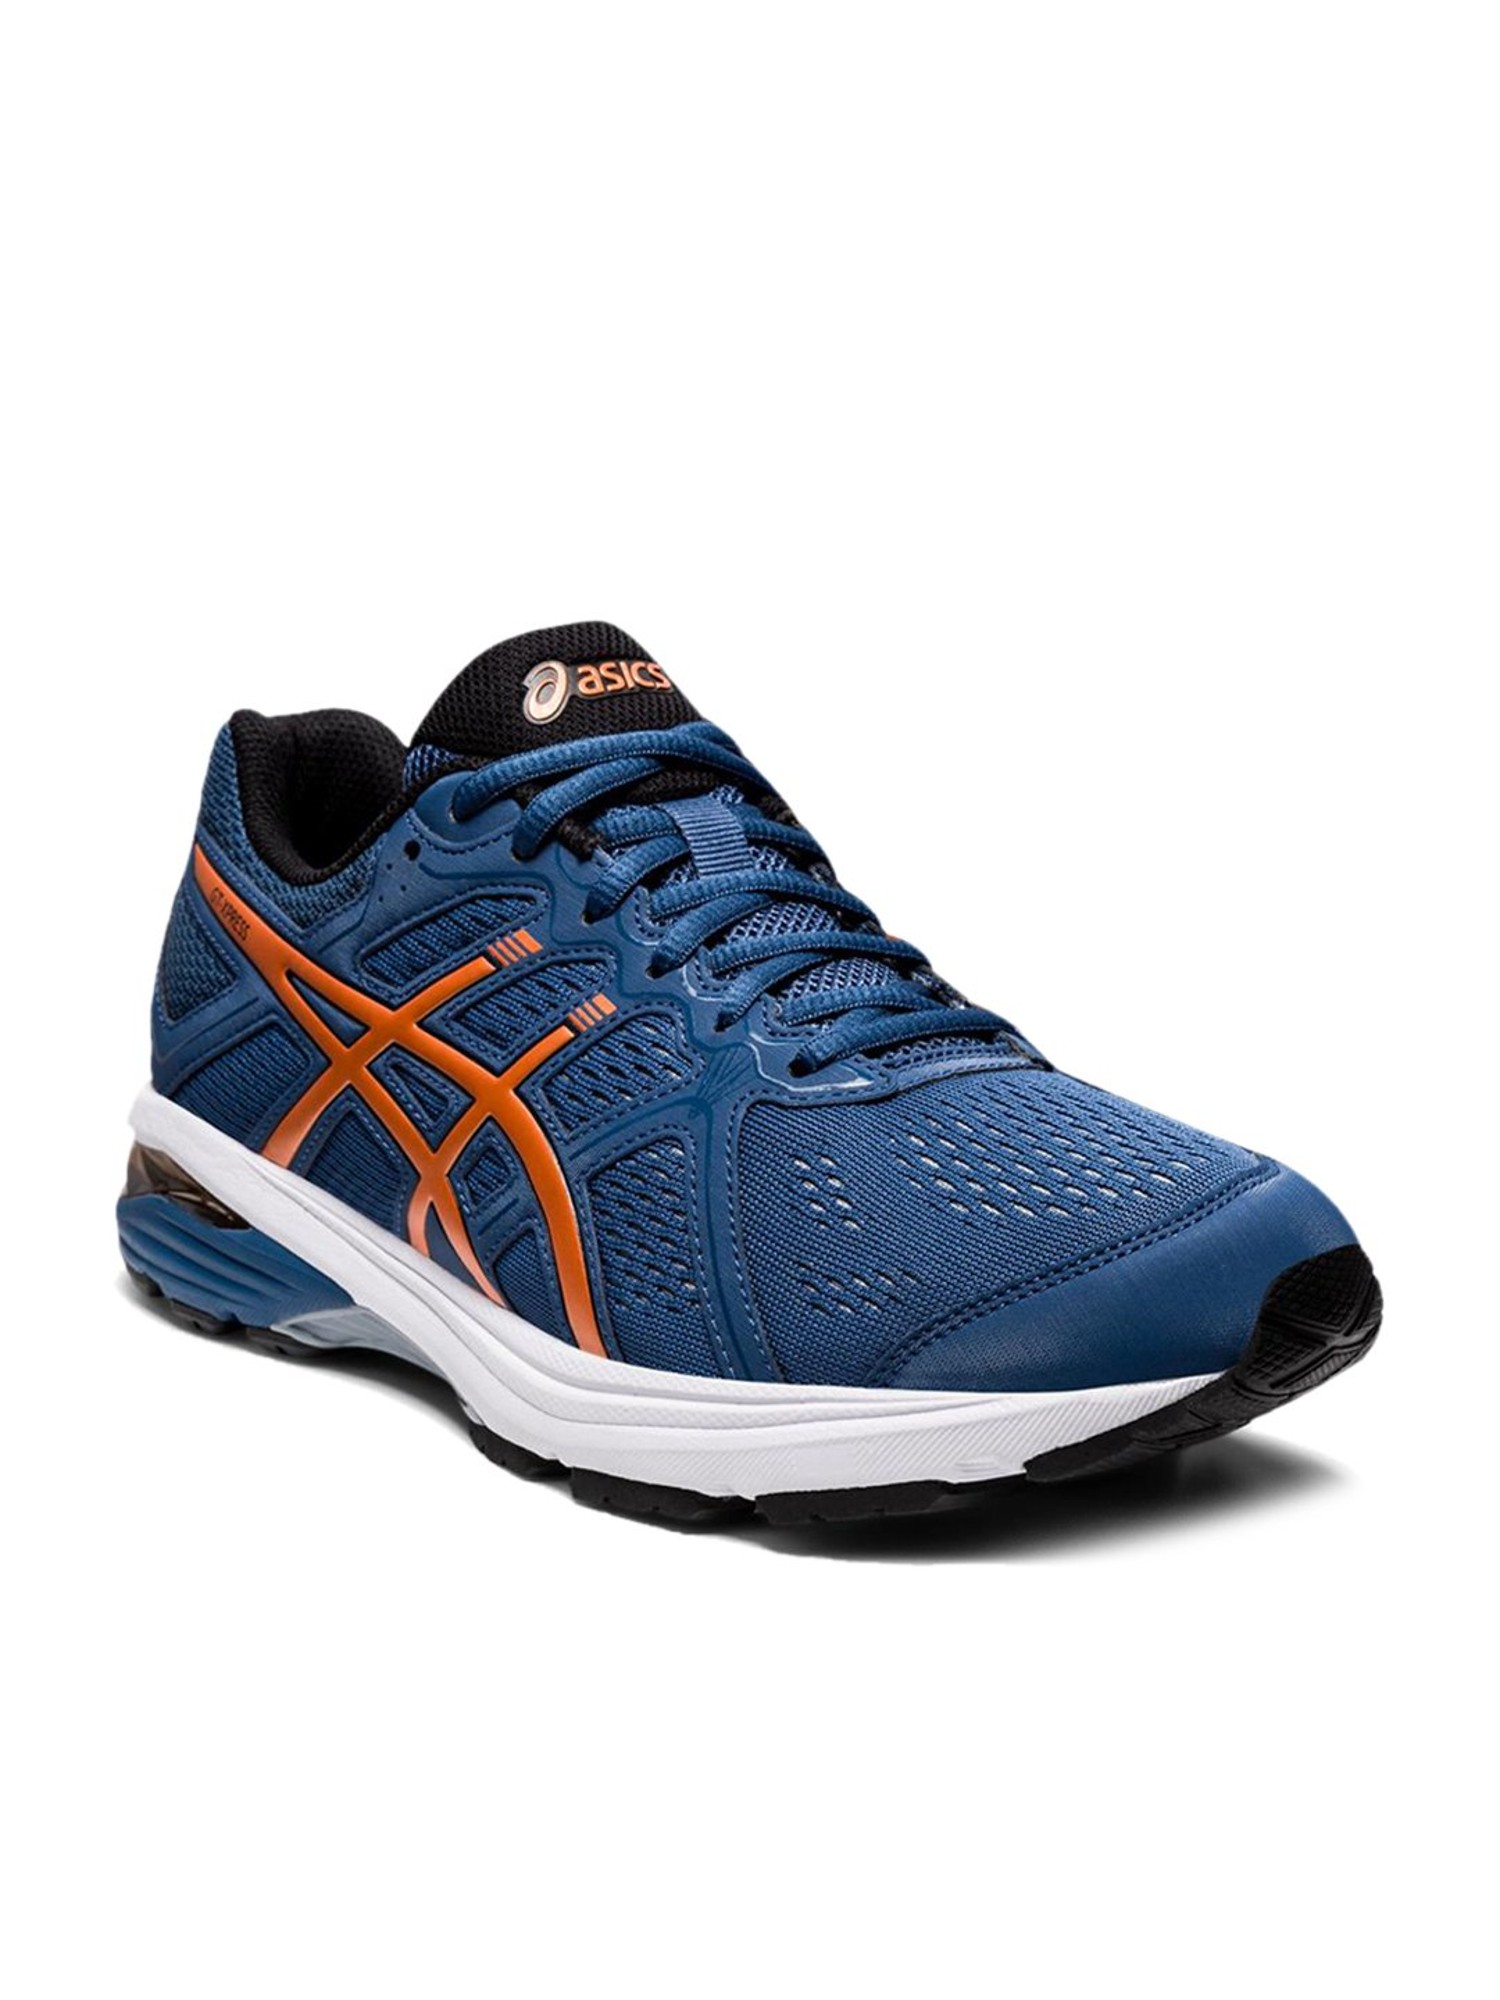 Buy Asics GT-Xpress Blue Running Shoes for Men at Best Price @ Tata CLiQ